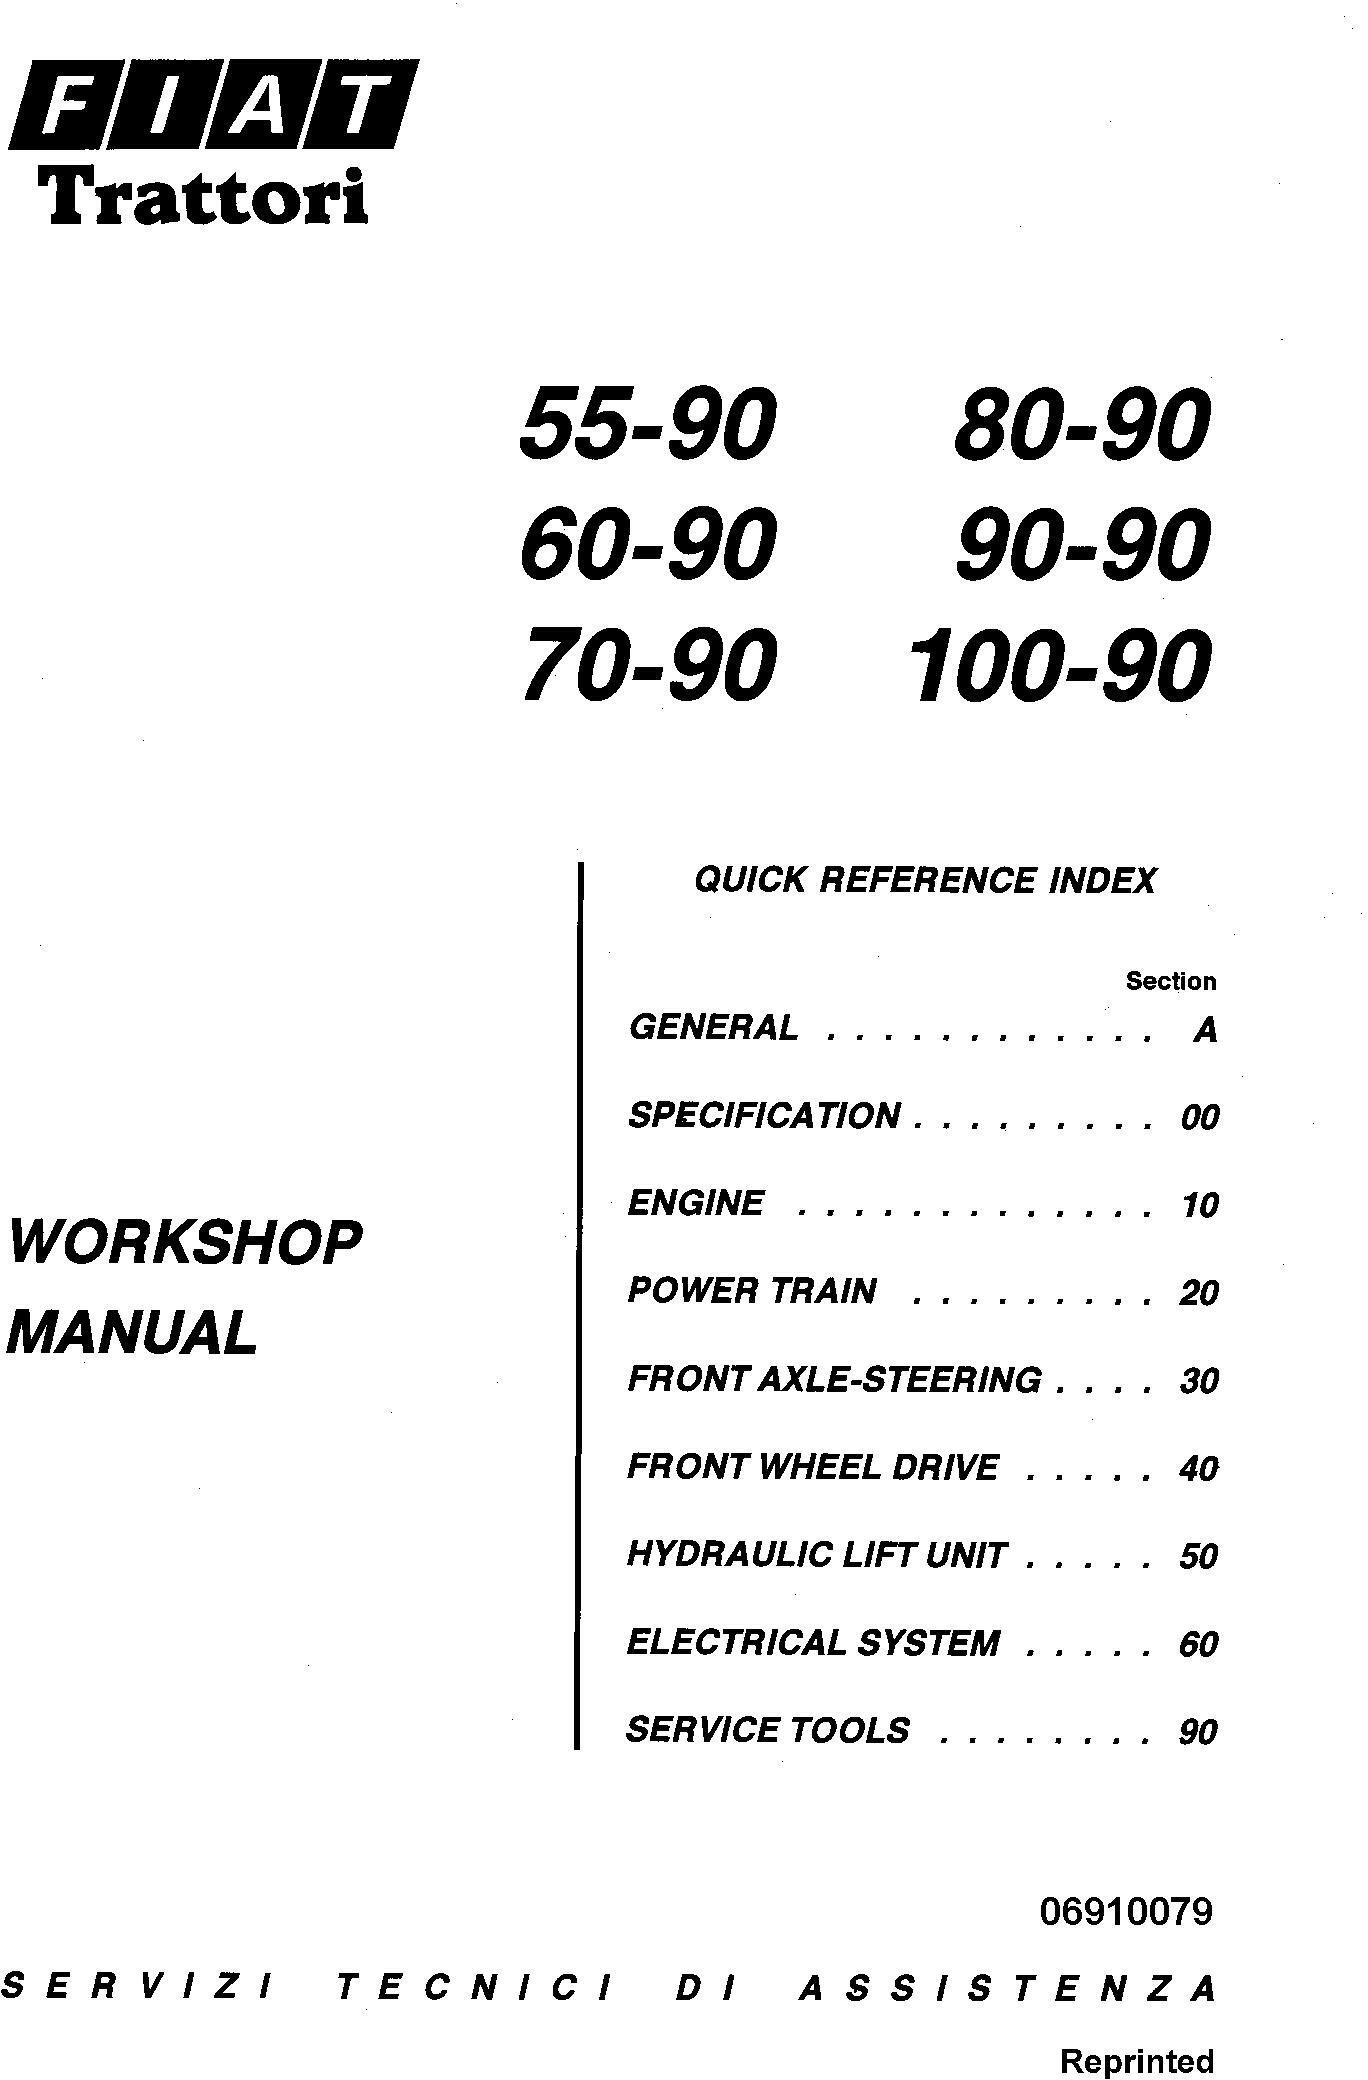 Fiat 55-90, 60-90, 70-90, 80-90, 90-90, 100- 90 Tractor Service Manual (6035424100)